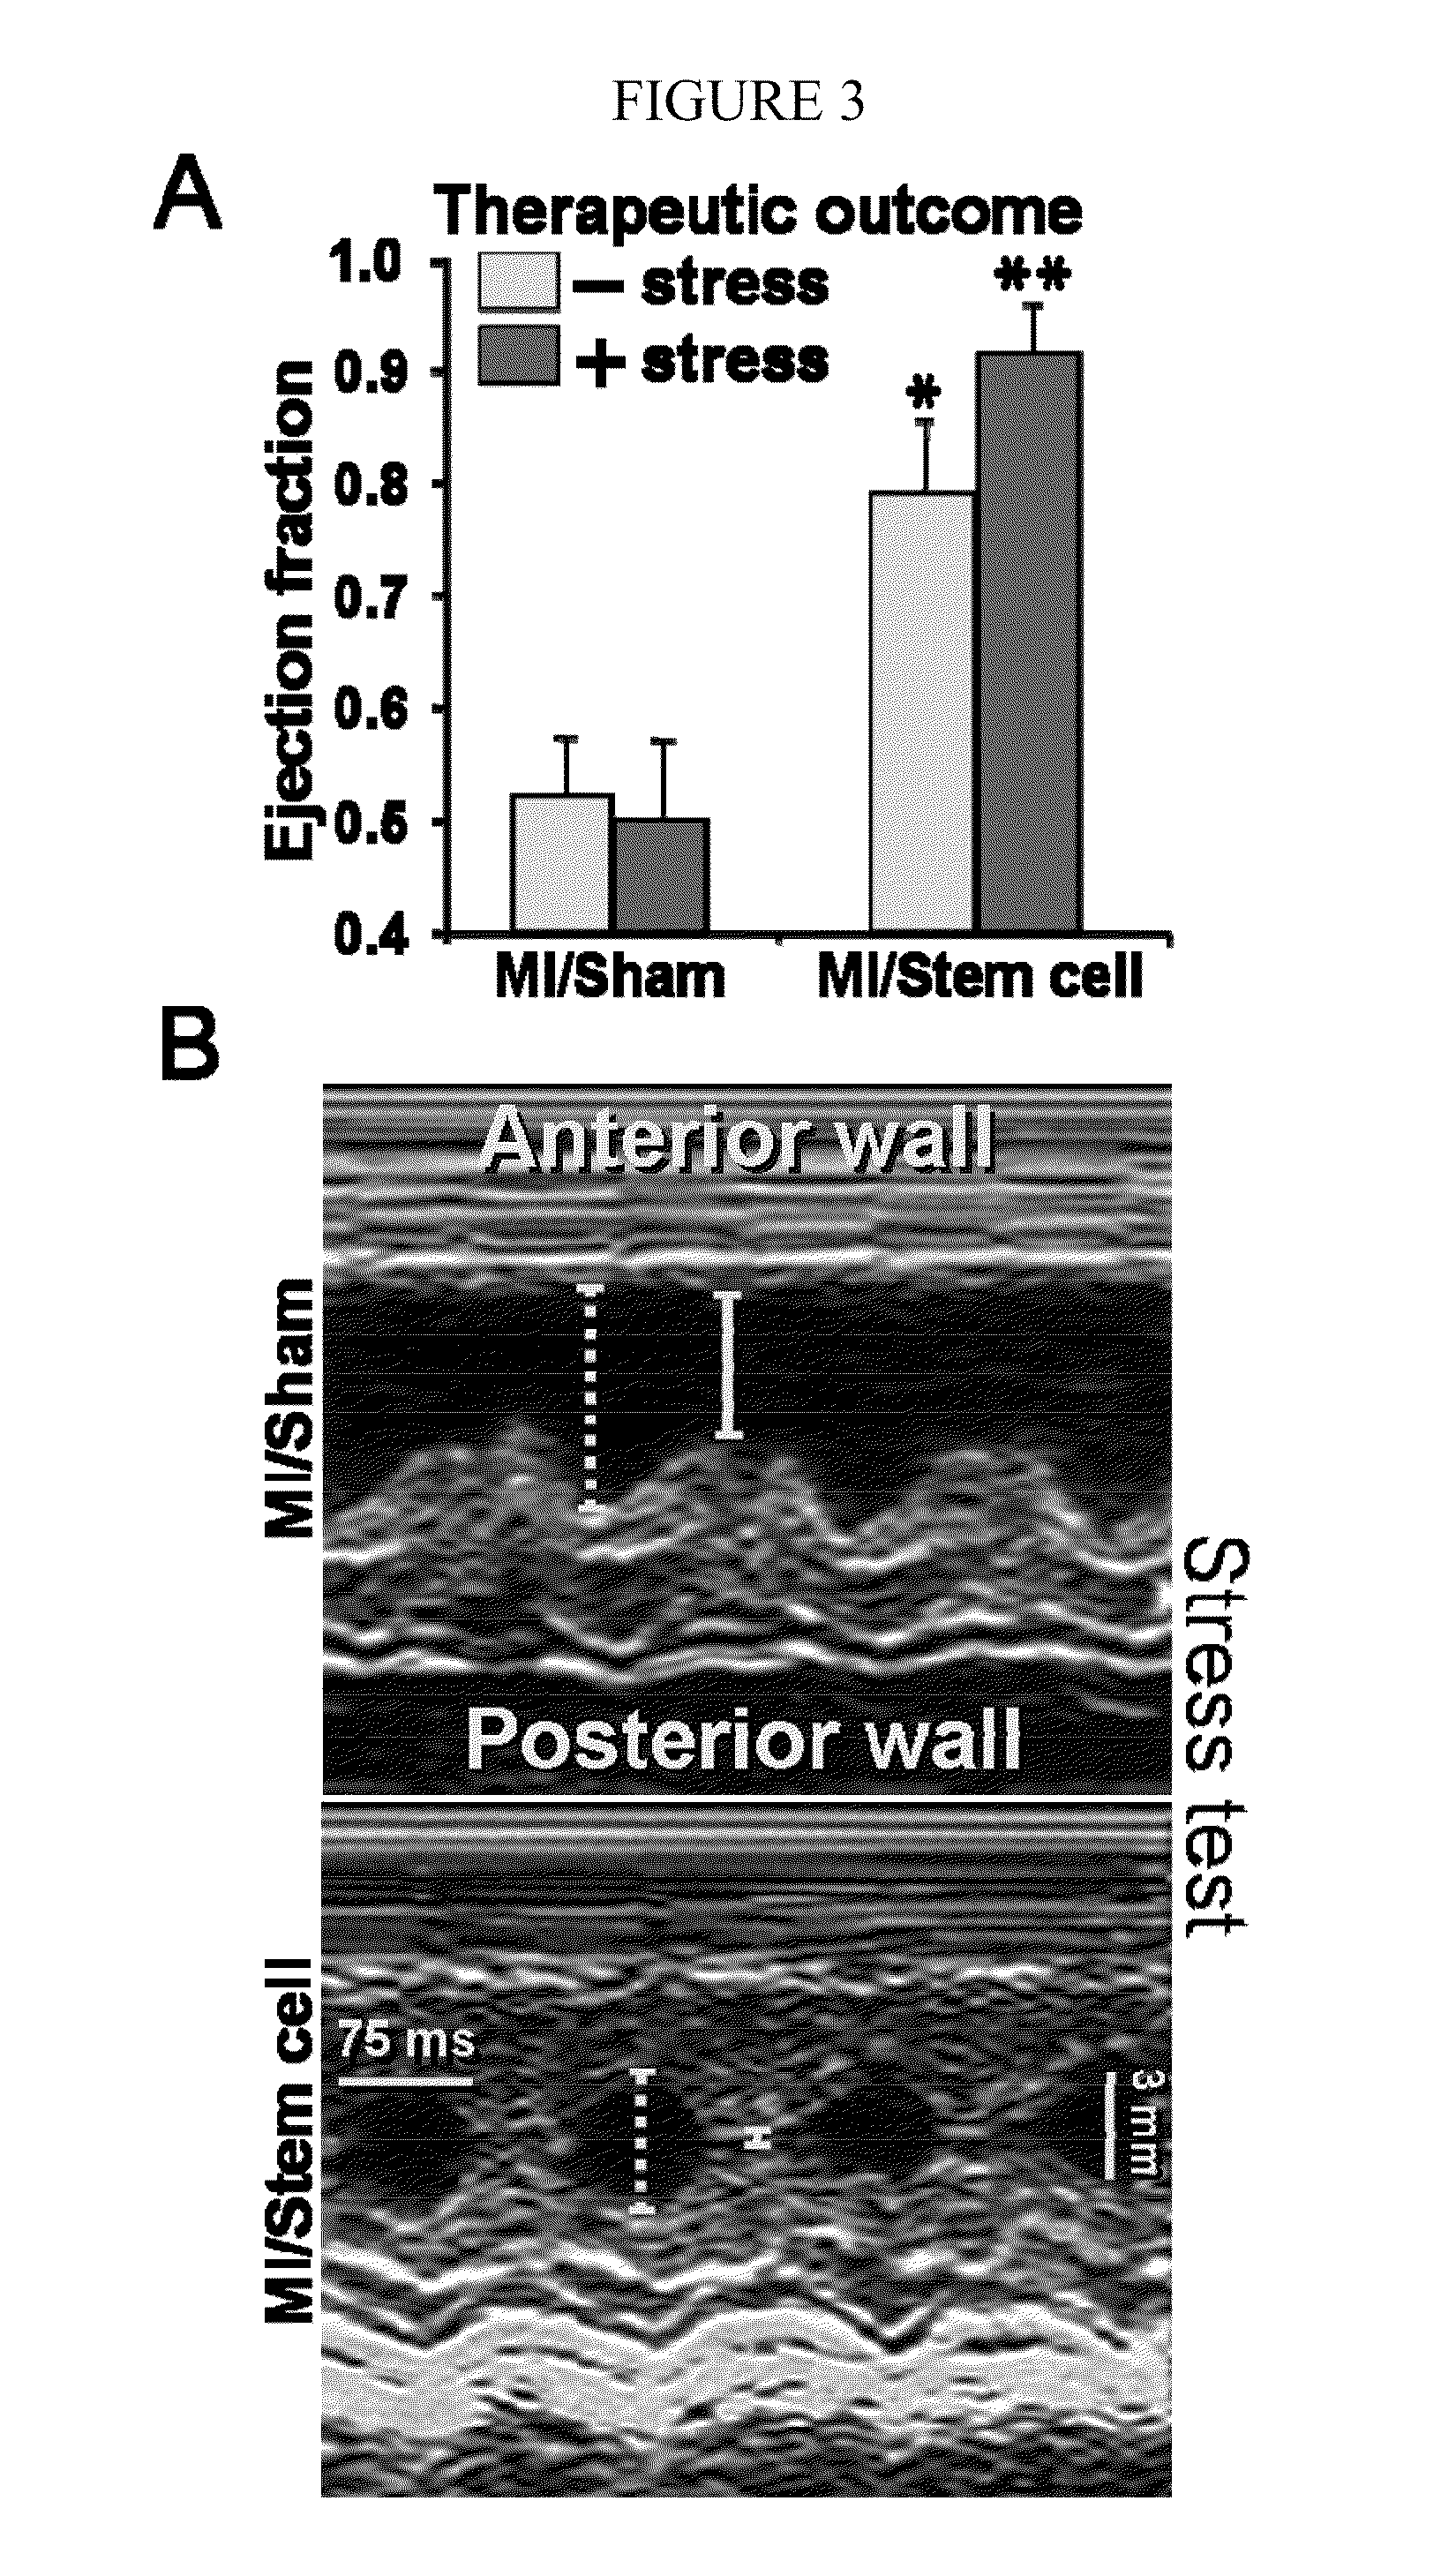 Compositions consisting essentially of TGF-β, BMP-2 FGF-4, leukemia inhibitory factor, IGF-1, IL-6 and H-α-thrombin